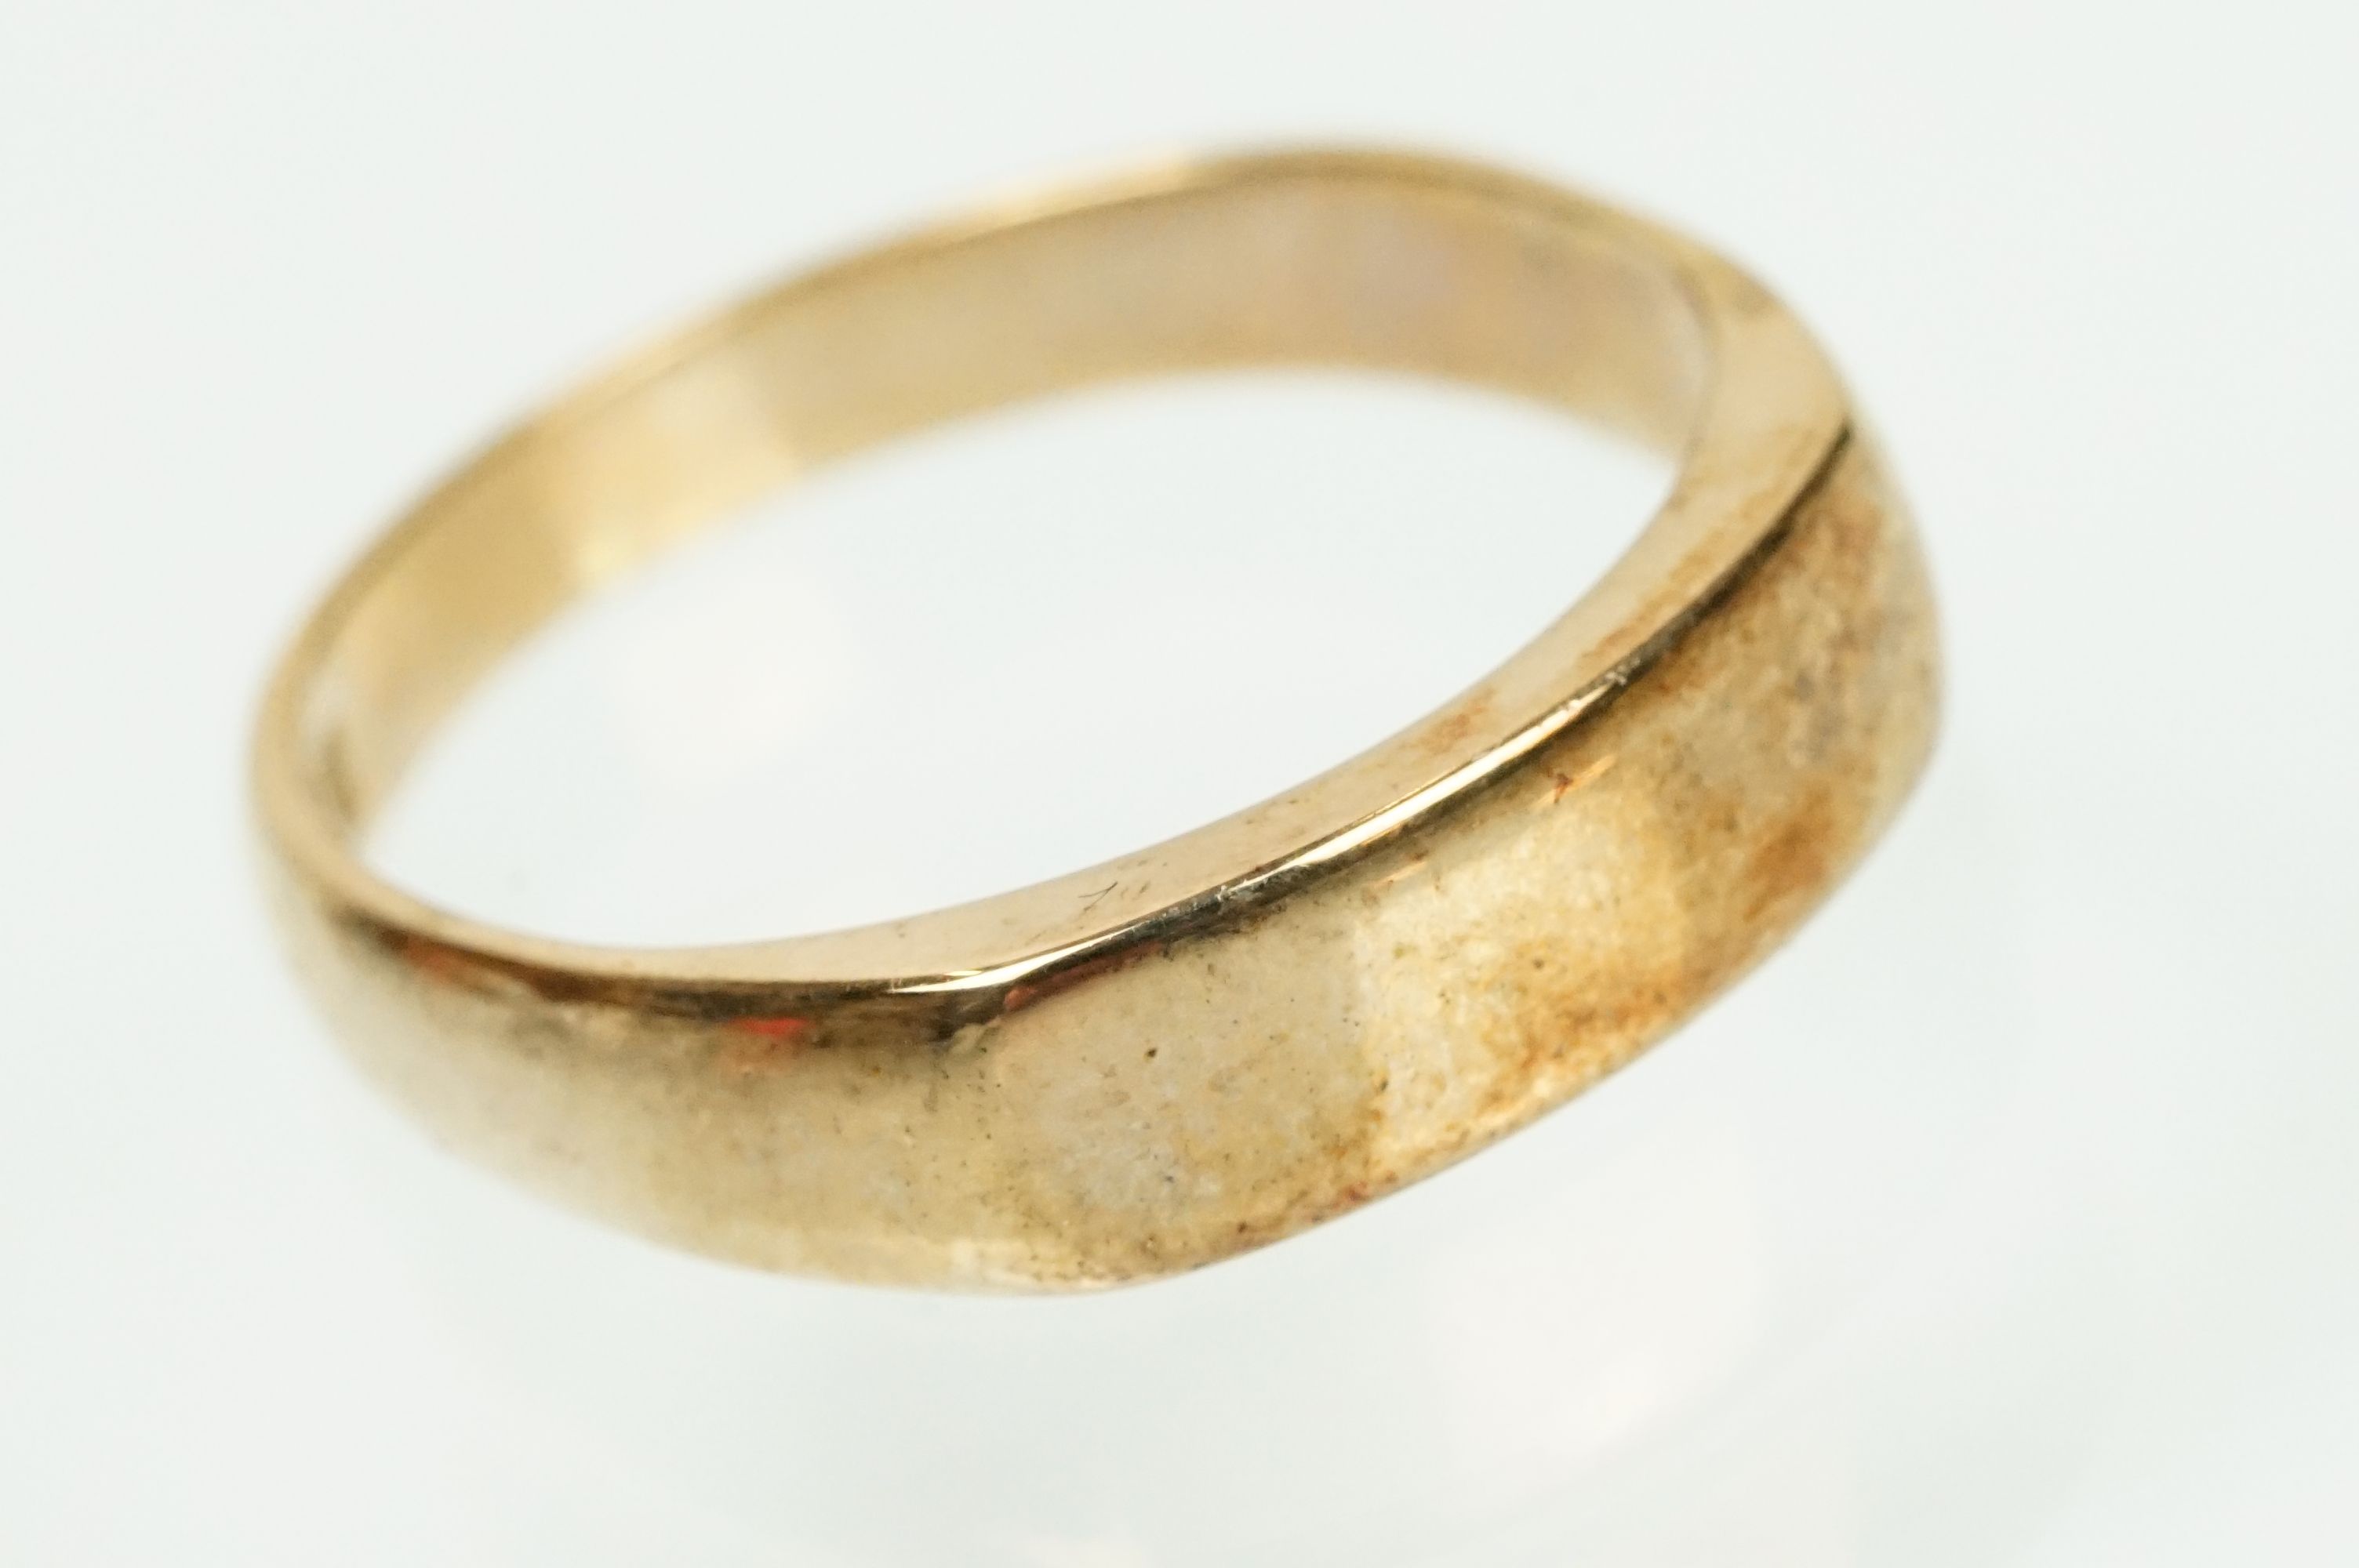 9ct gold band ring with flat head. Marked 375 to shank. Size N.5.